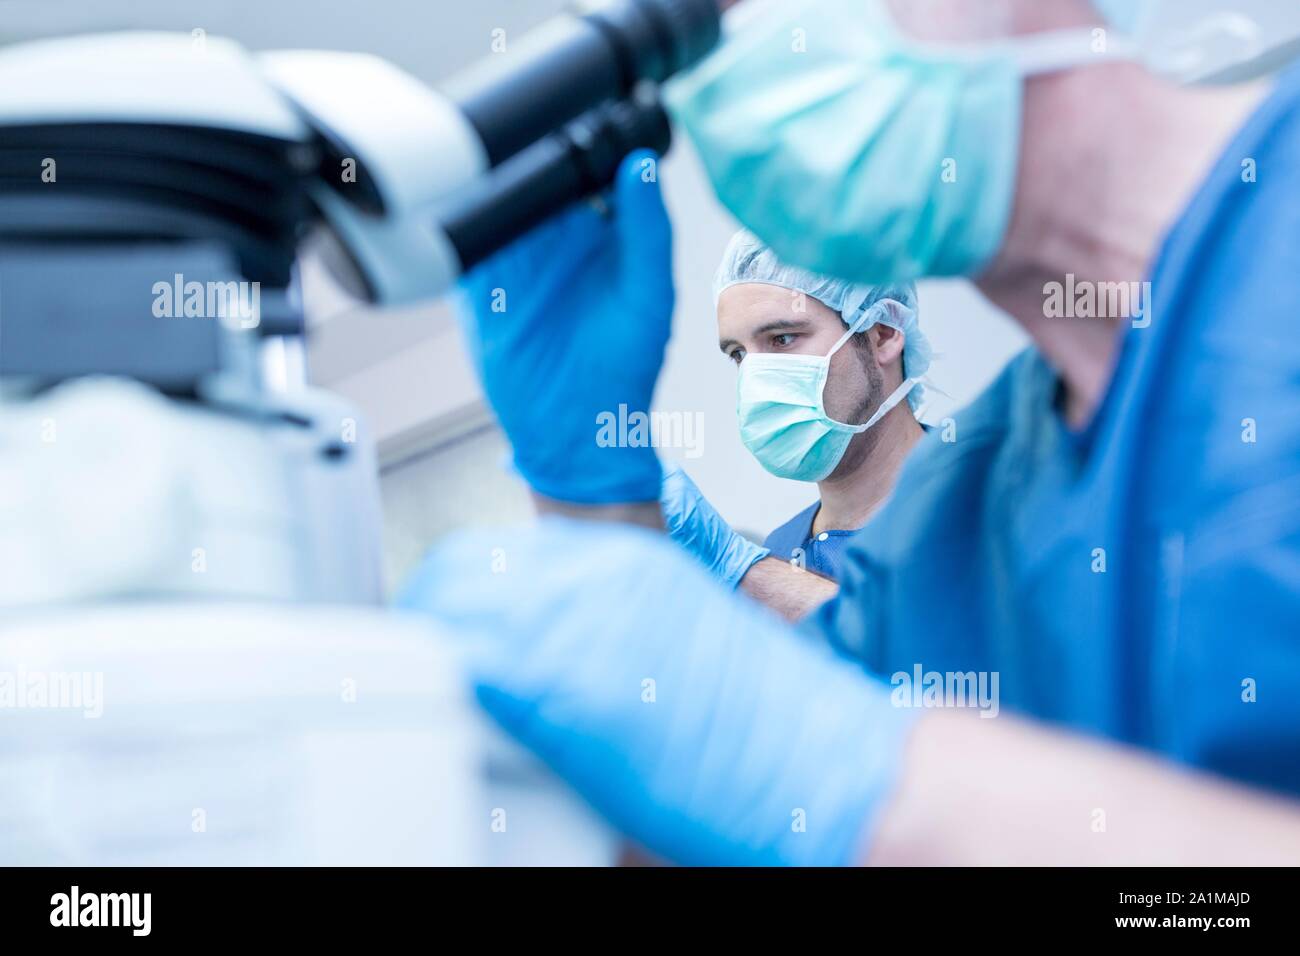 Surgical team performing laser eye surgery. Stock Photo